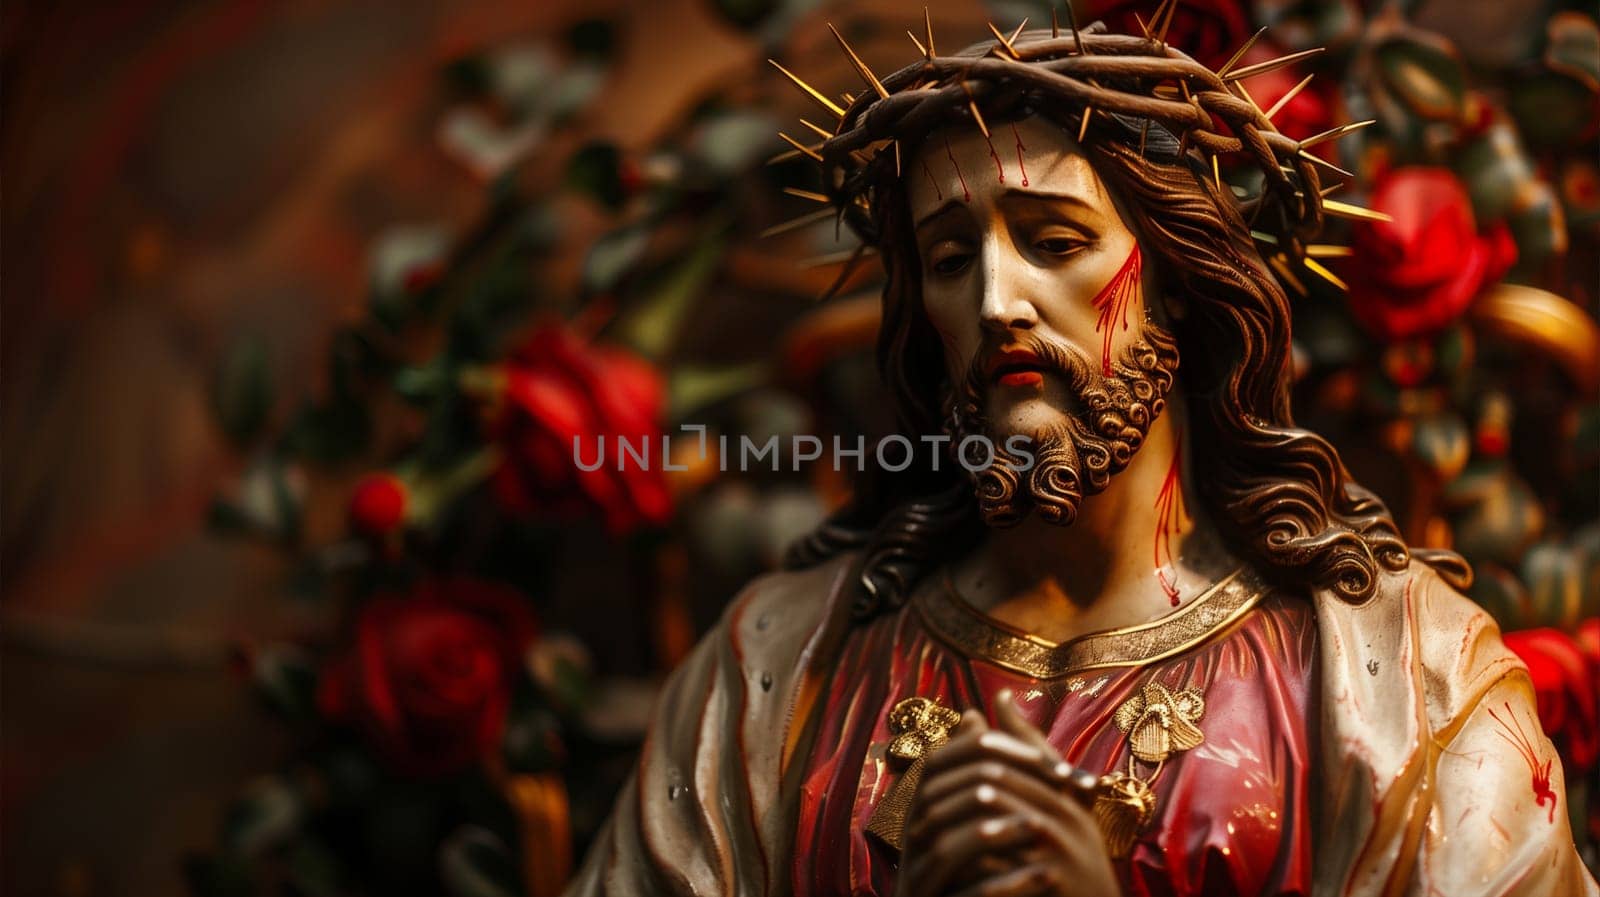 Statue of Jesus Surrounded by Red Roses by Sd28DimoN_1976